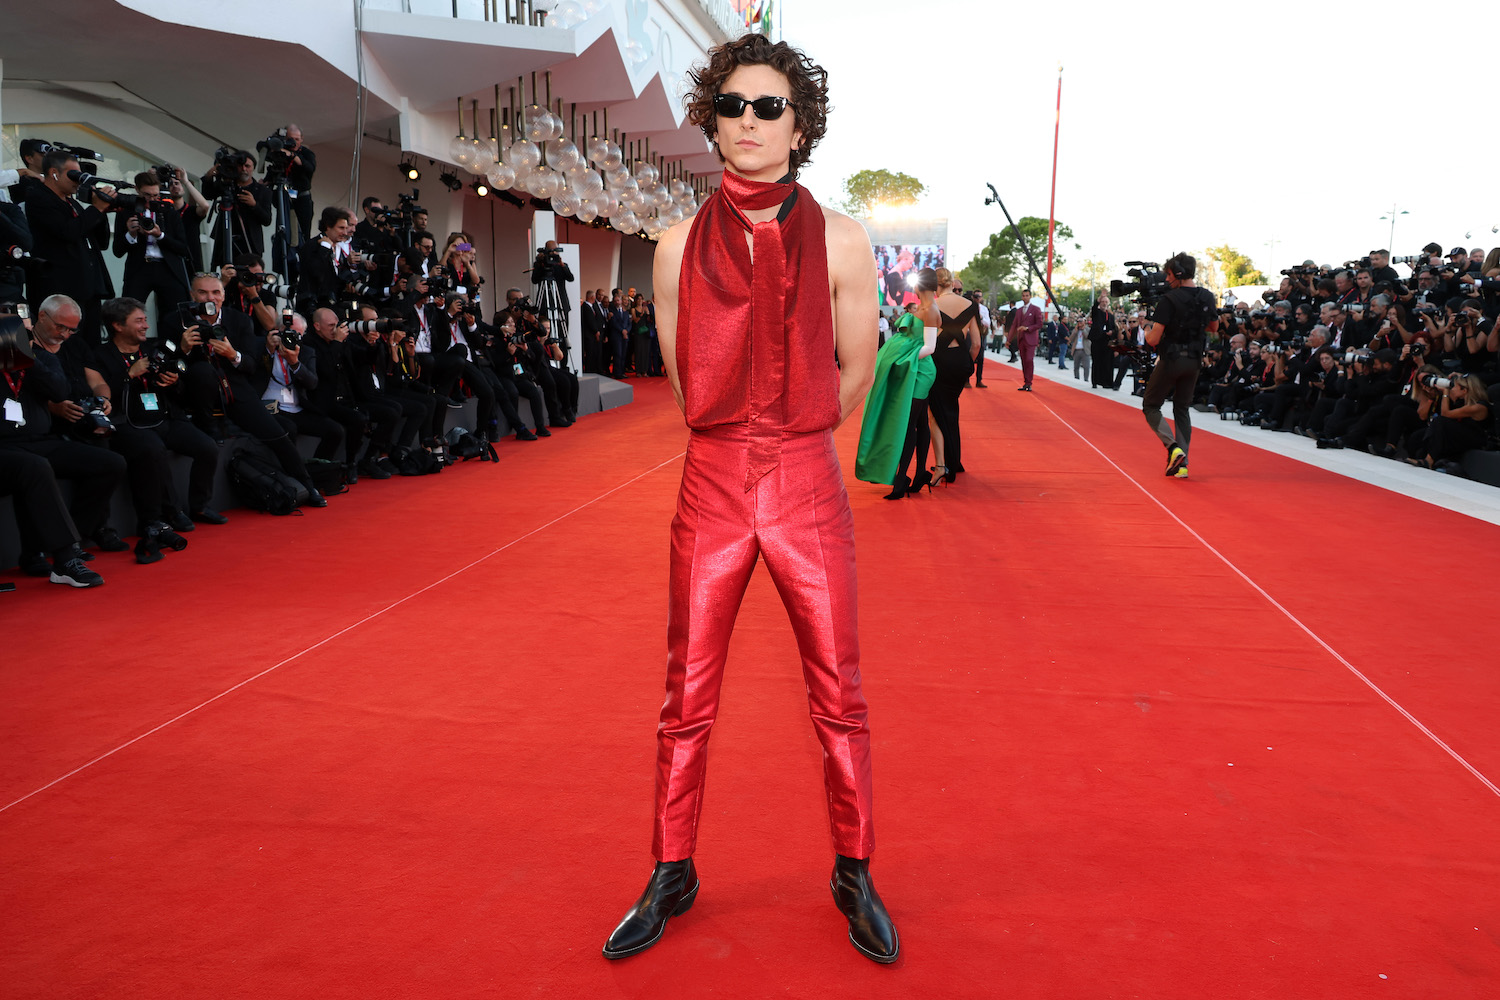 A red carpet photo of actor Timothee Chalamet at the 79th International Venice Film Festival